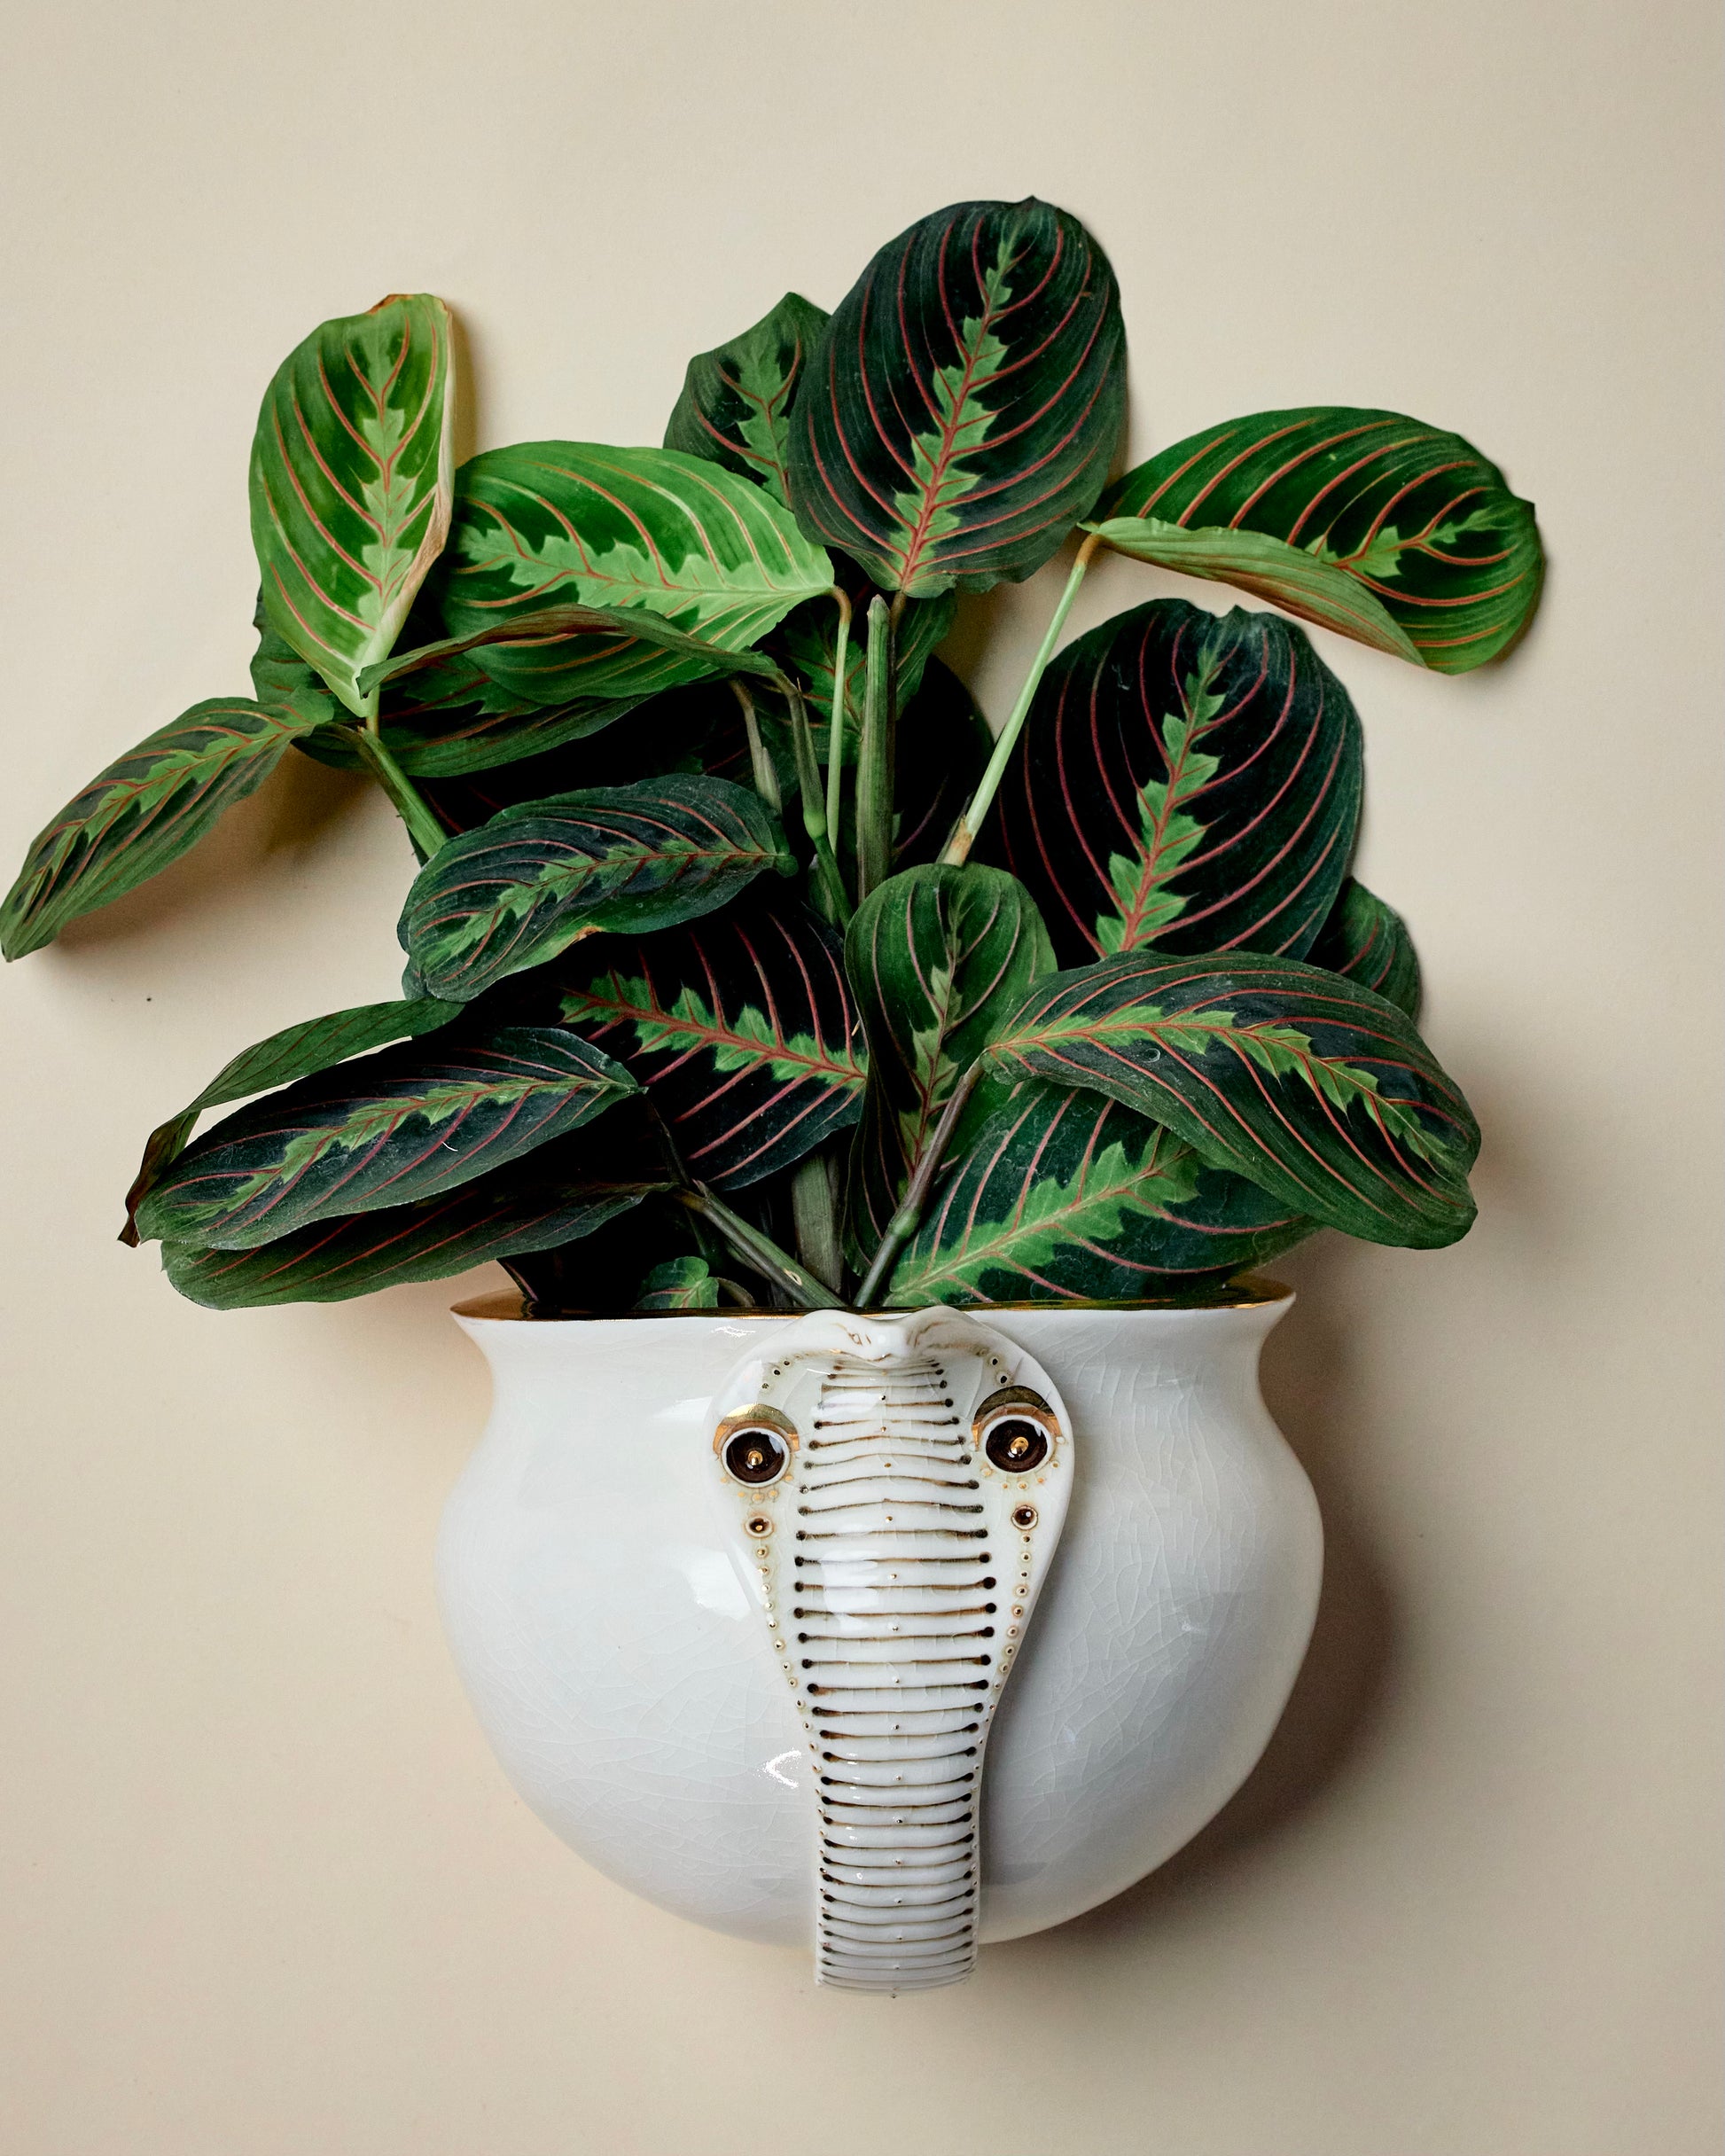 Snake Planter 2 - Hand crafted Porcelain Home Planter with Snake Detail